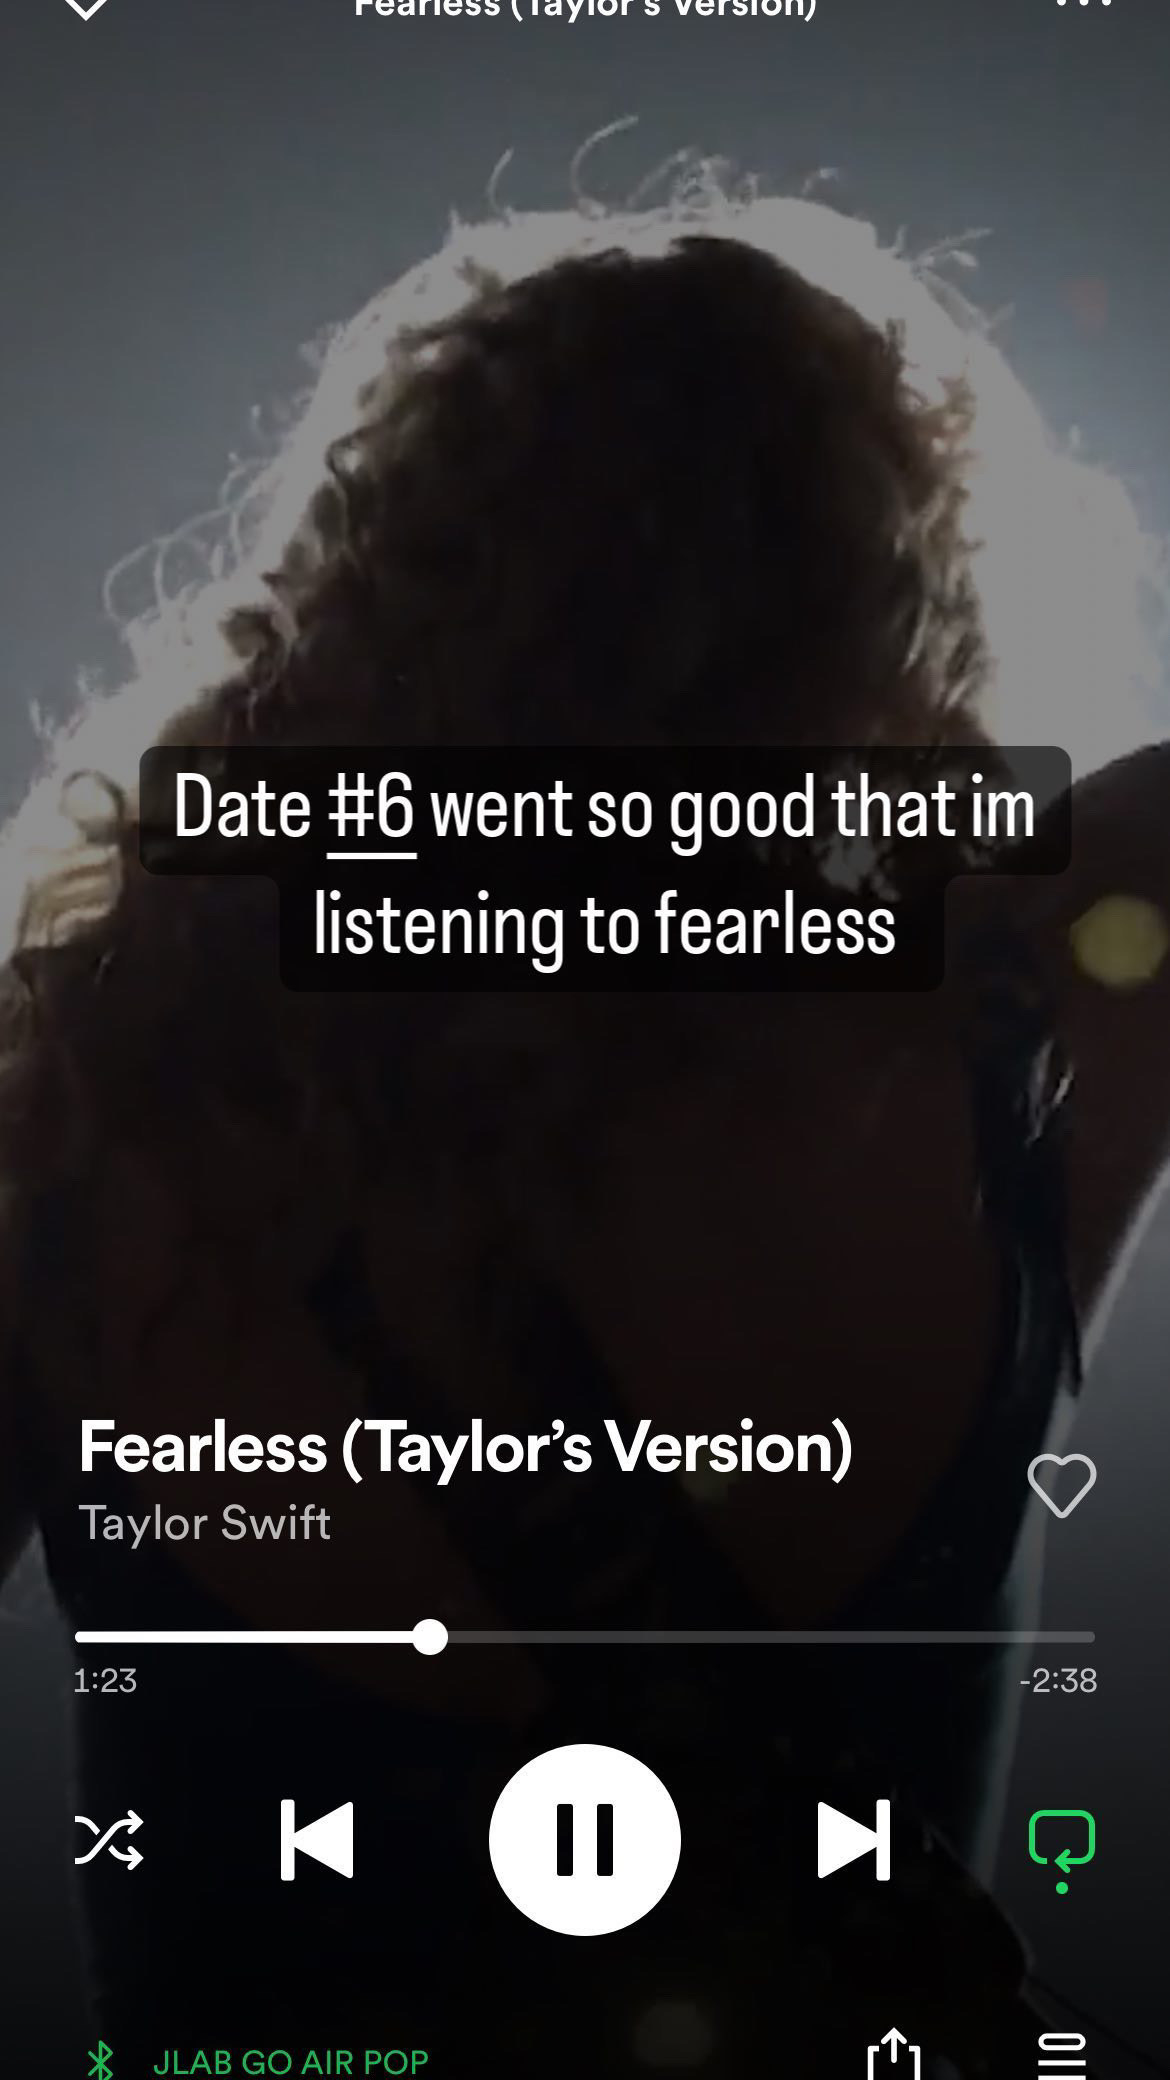 author listing to taylor swift &quot;fearless&quot; after the date